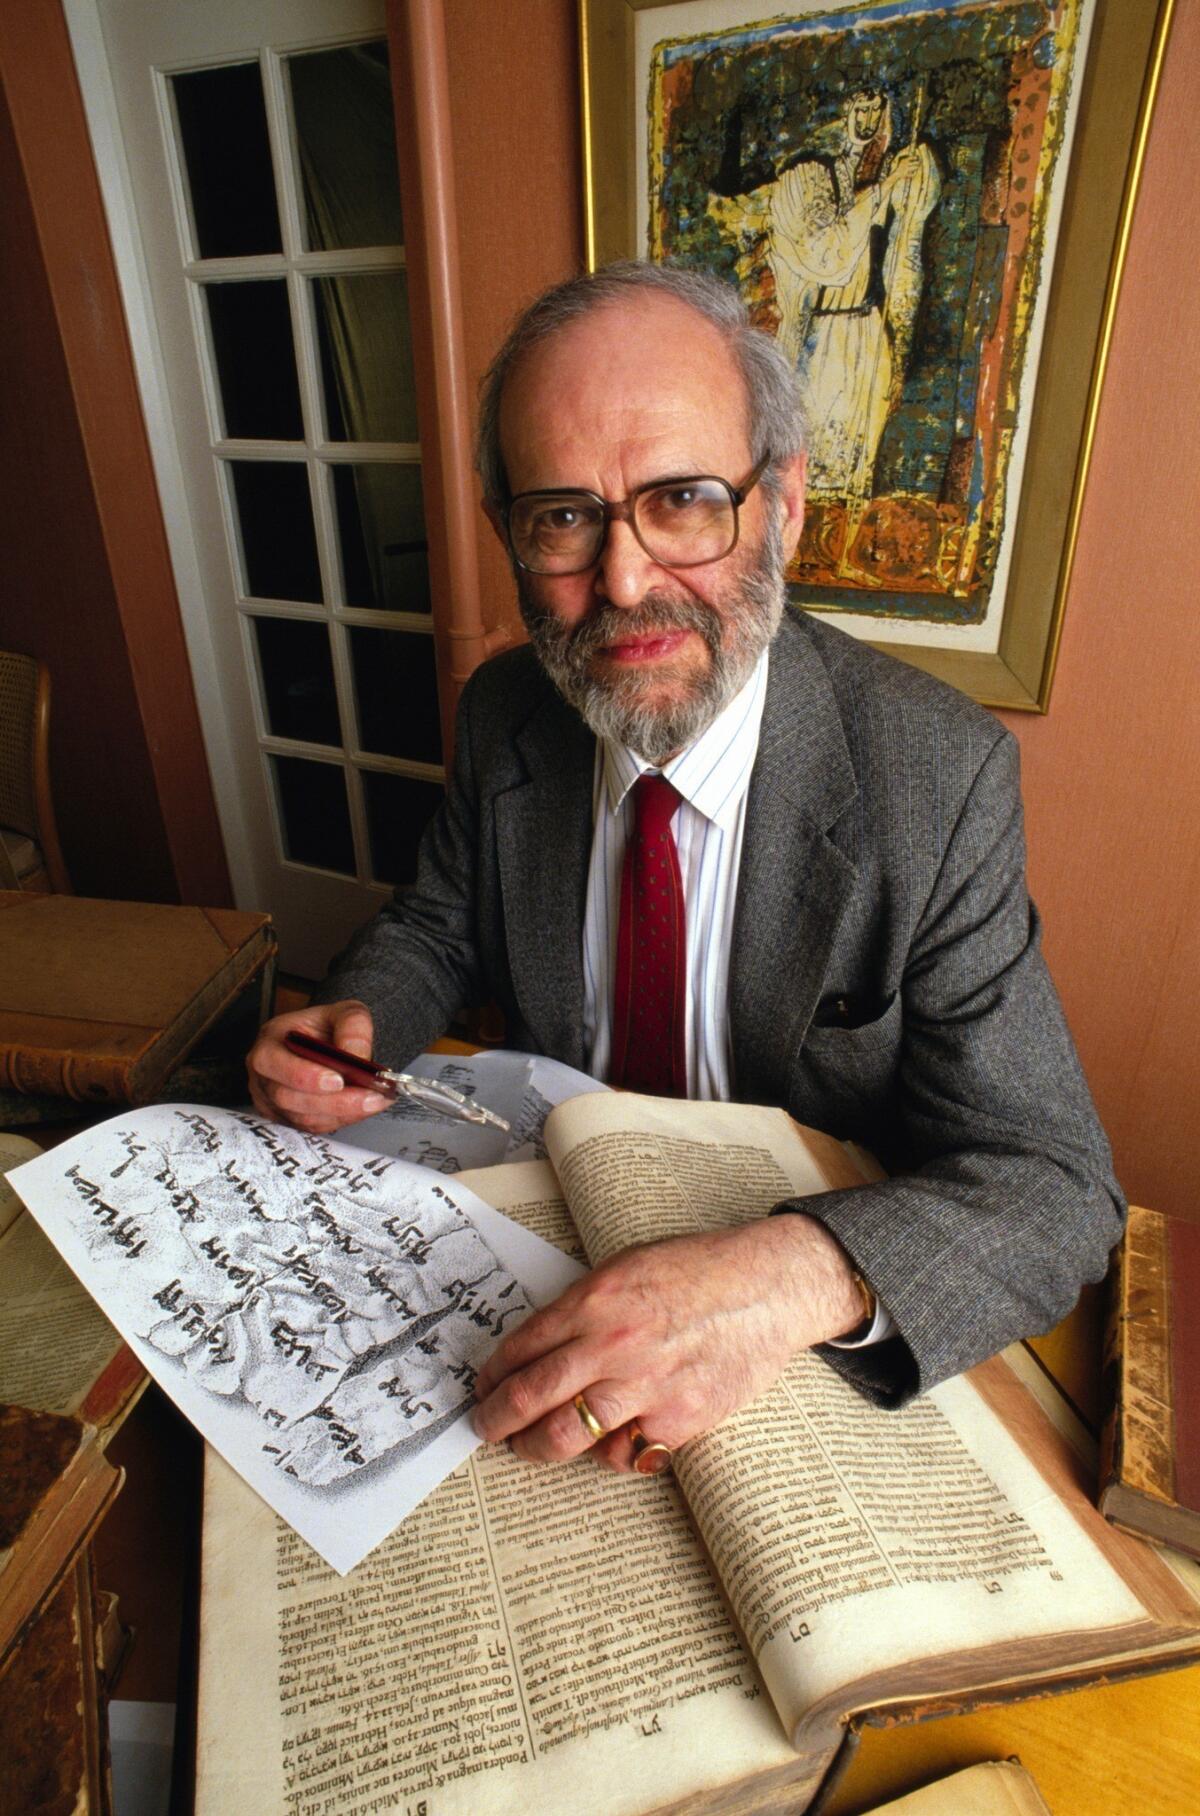 Geza Vermes was known for his skillful translations of the Dead Sea Scrolls, which were first discovered in 1947 and contain the earliest known versions of the Hebrew Bible.